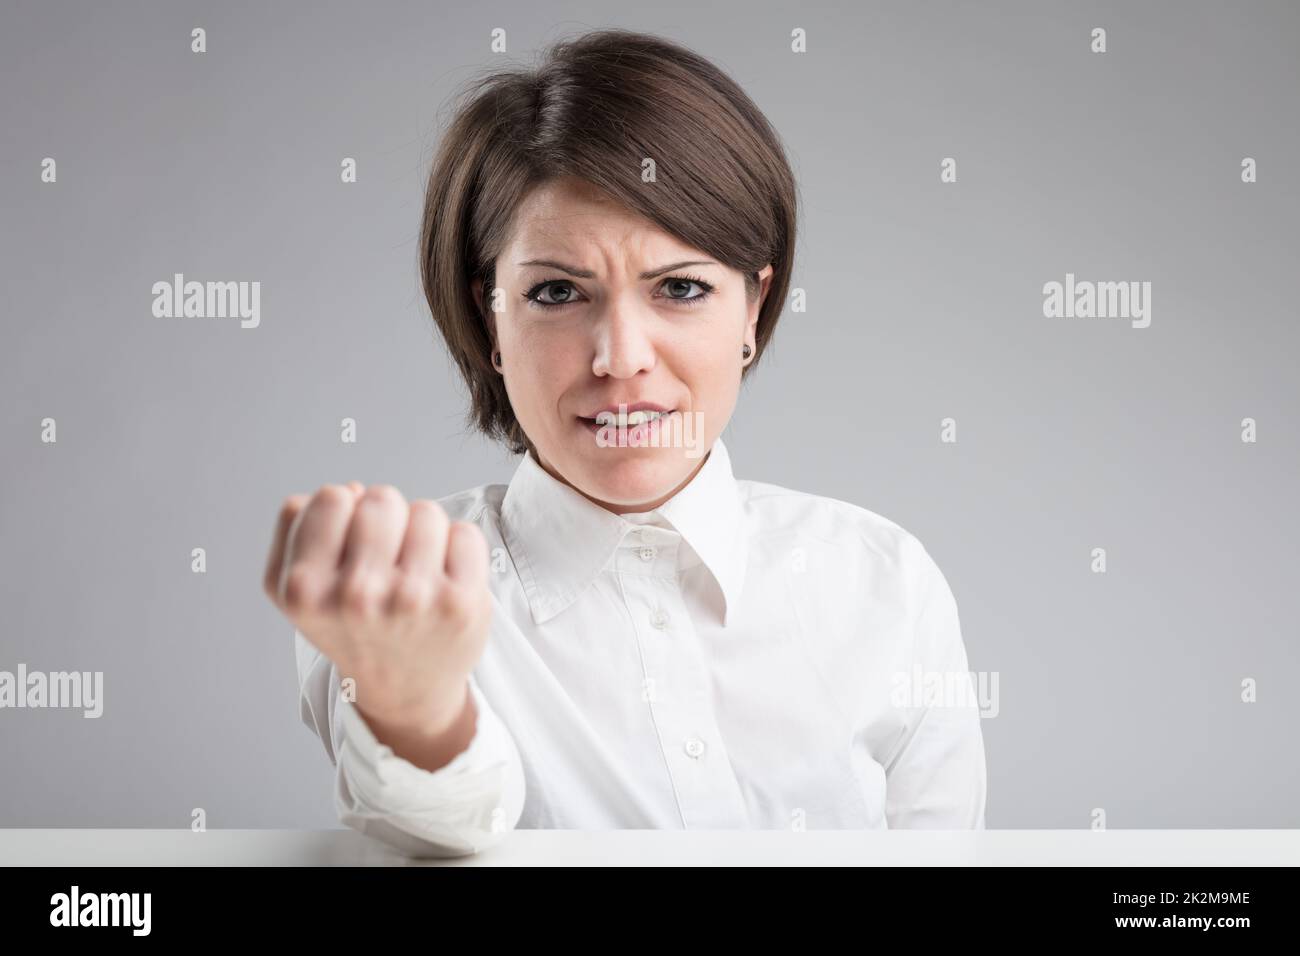 angry woman menacing to punch you Stock Photo